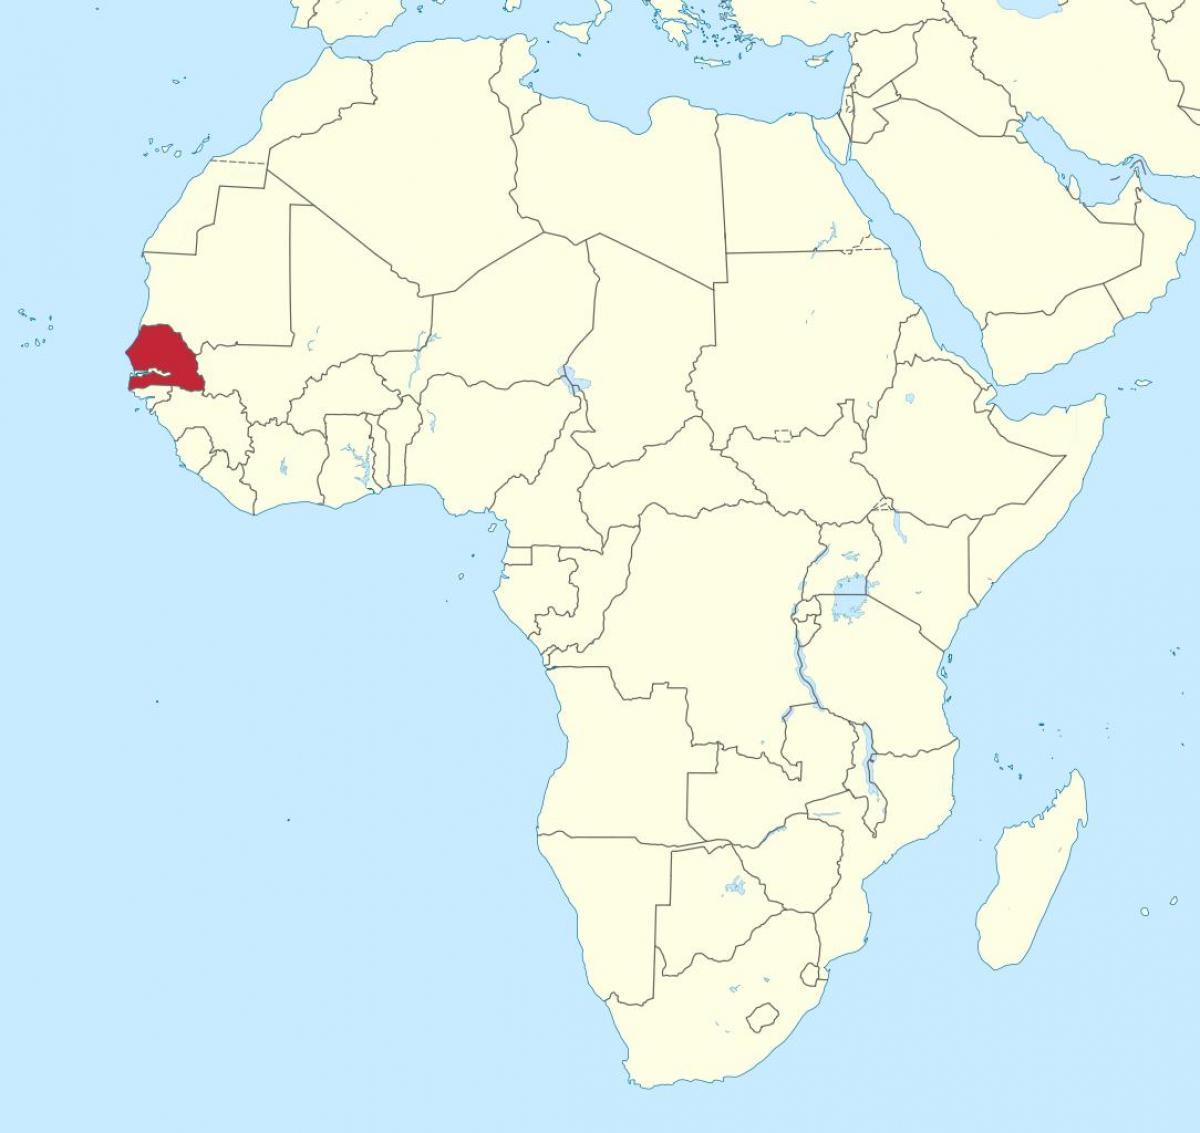 Senegal on map of africa